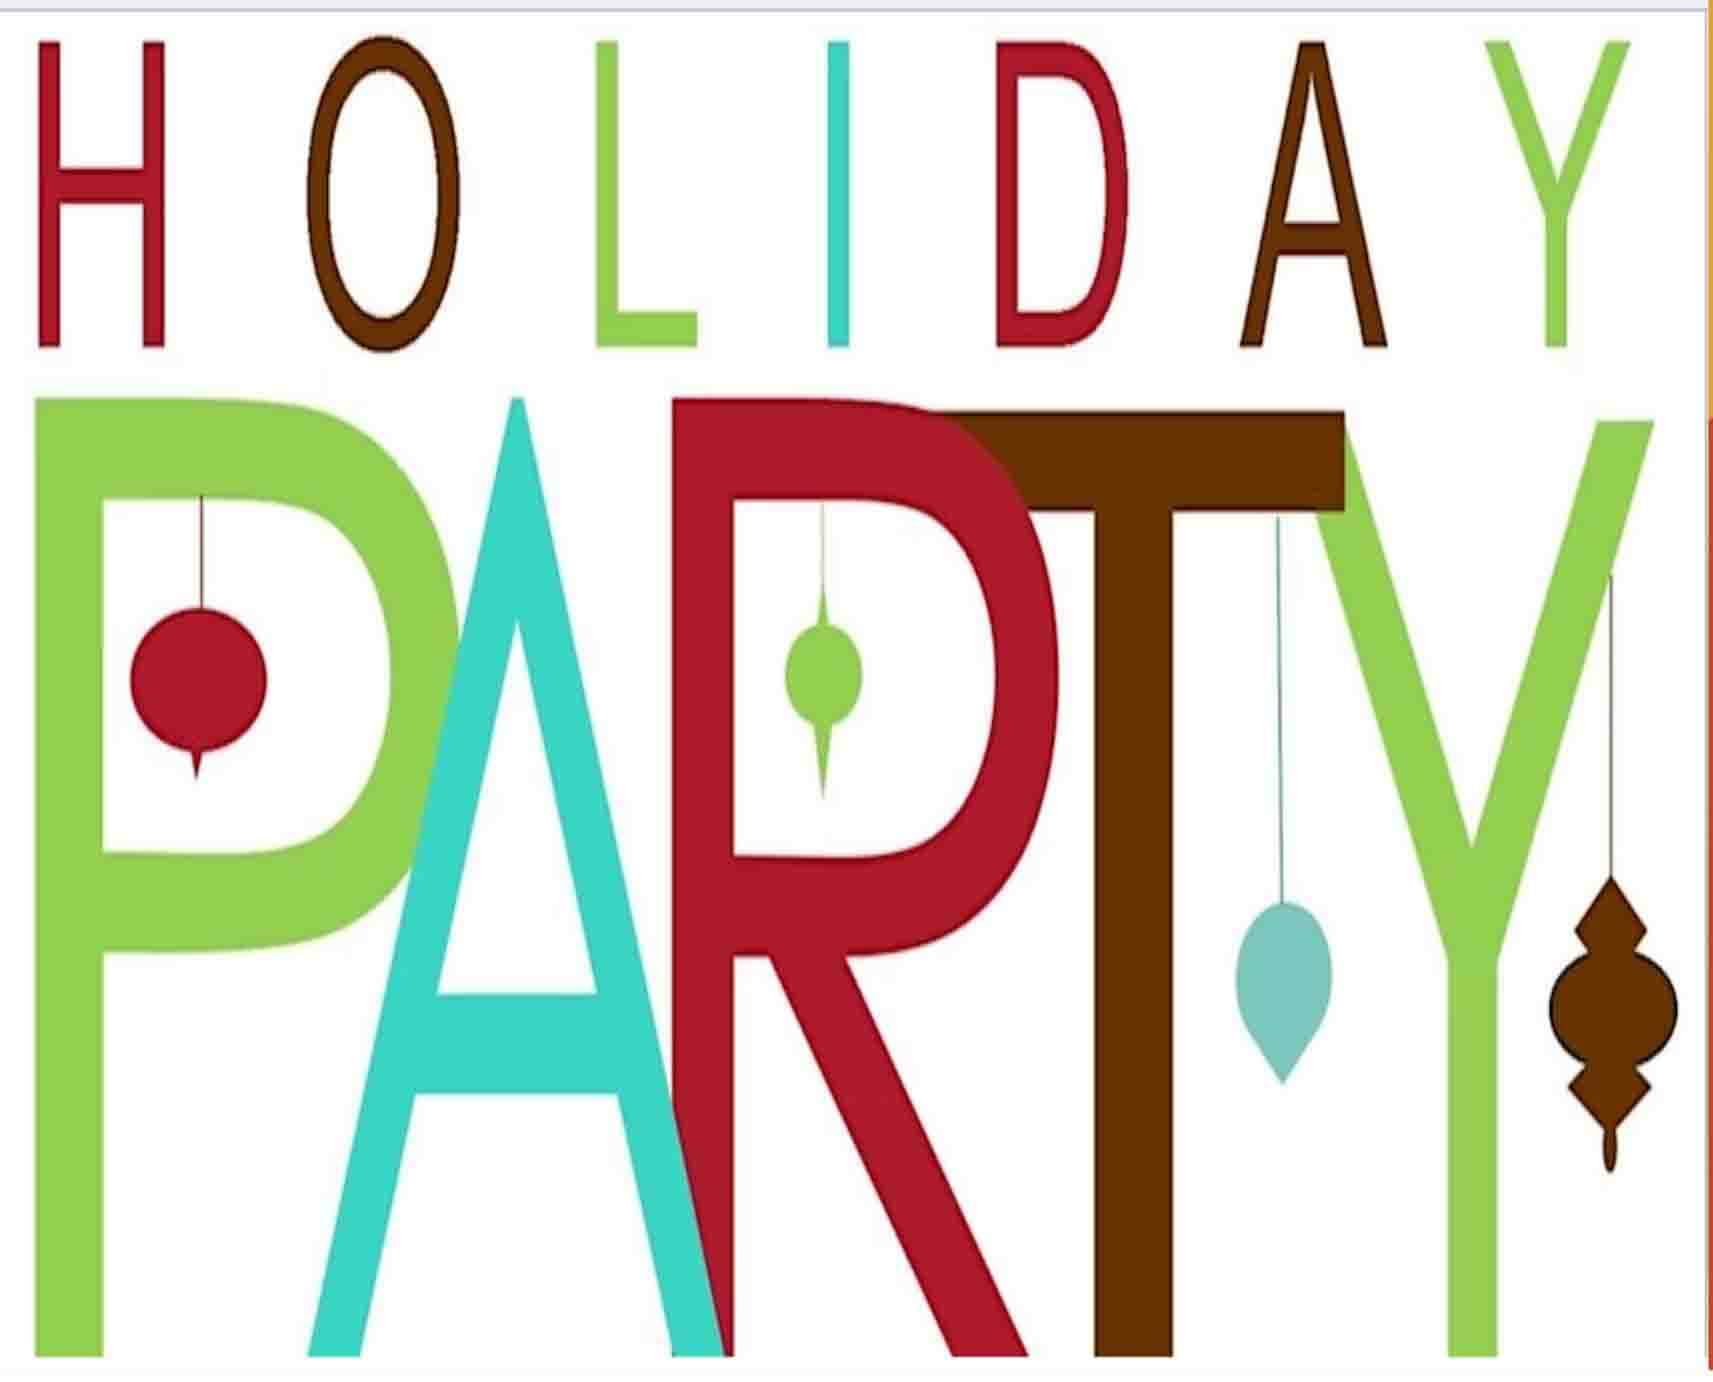 TEI ANNUAL HOLIDAY NETWORKING PARTY 2022